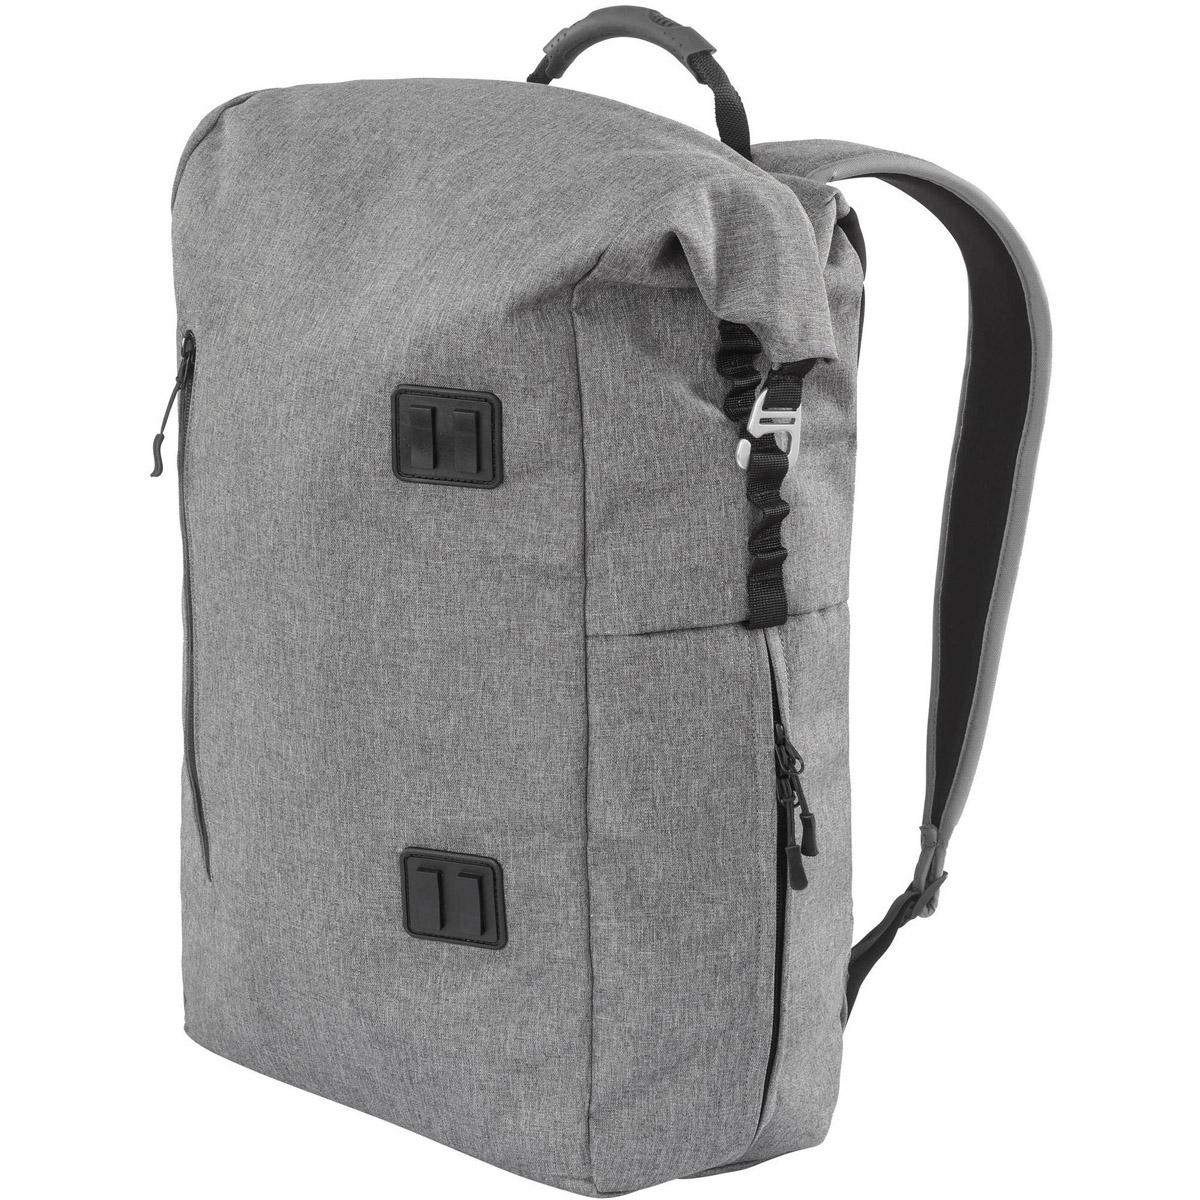 Ozark Trail 20L Roll Top Backpacking Backpack for $8.35